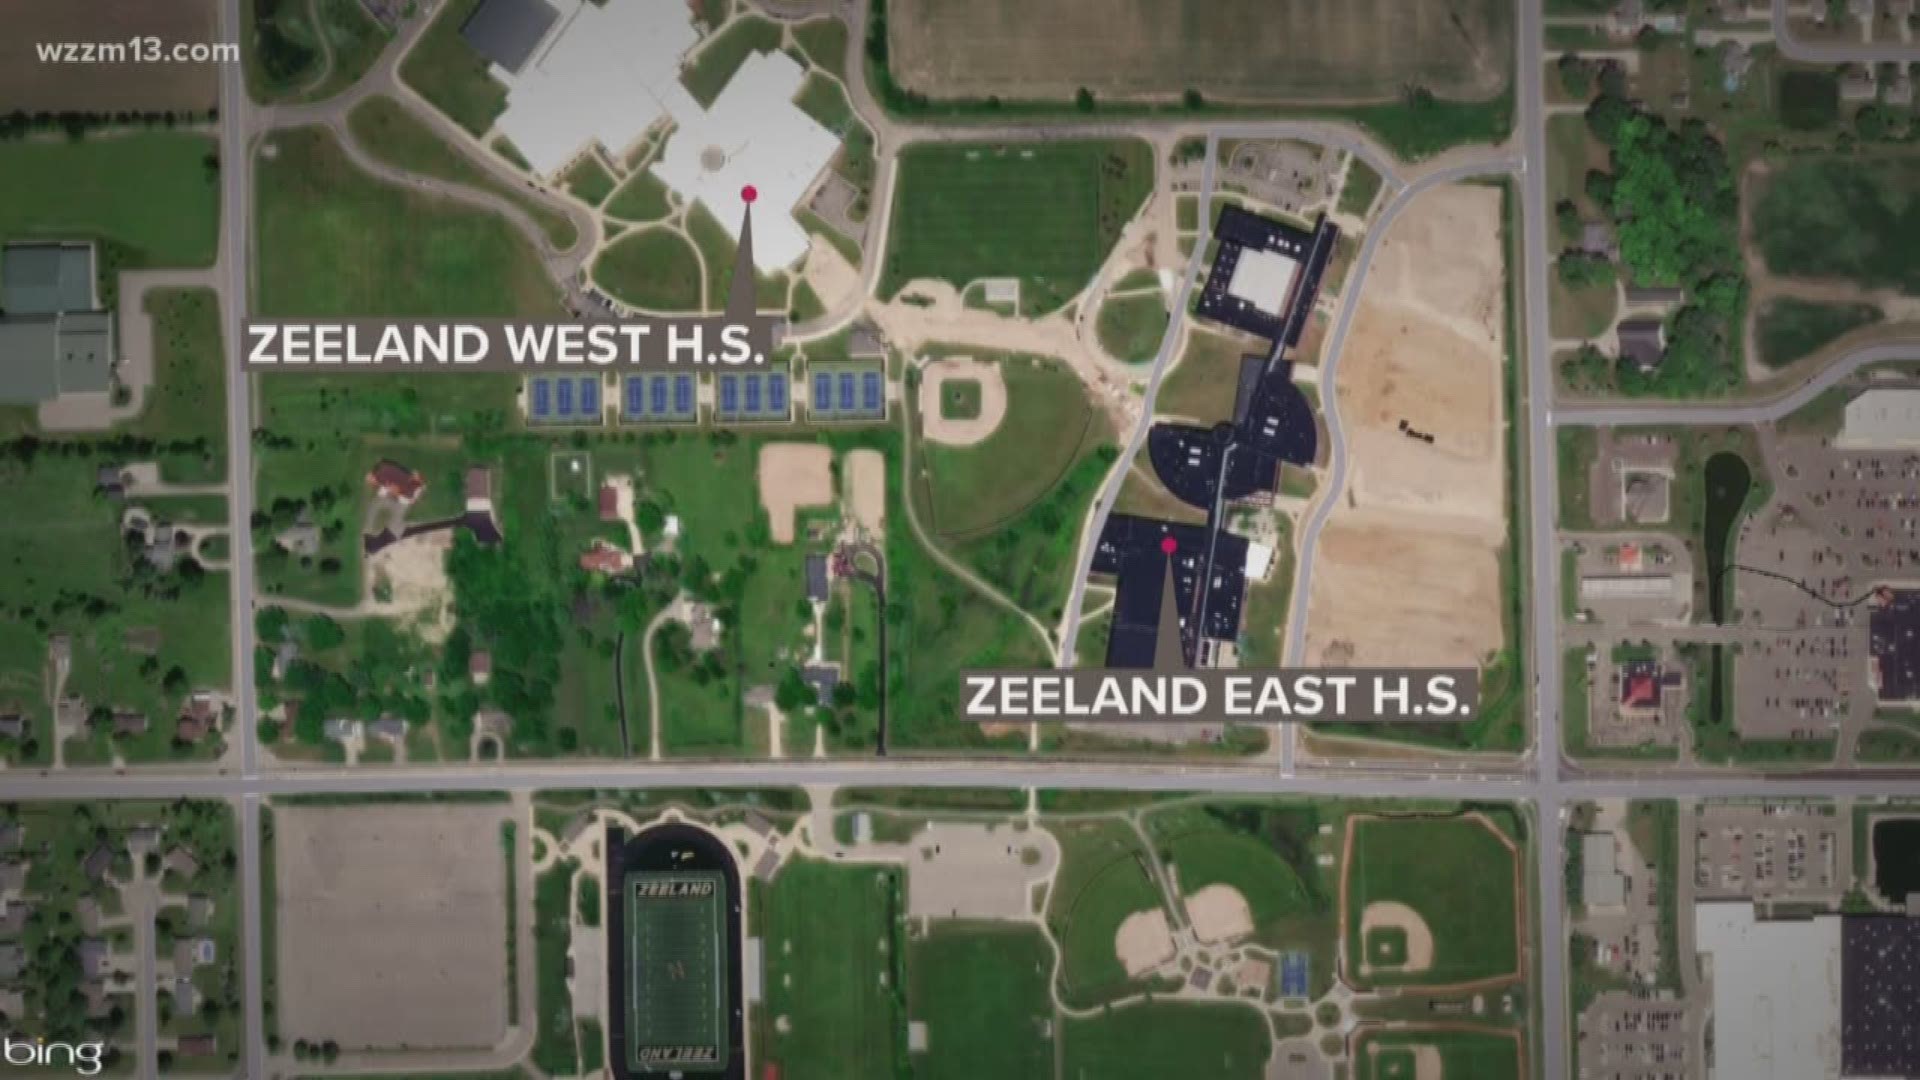 According to Zeeland Public Schools, a former student in the area made threats on social media toward current Zeeland High School students.